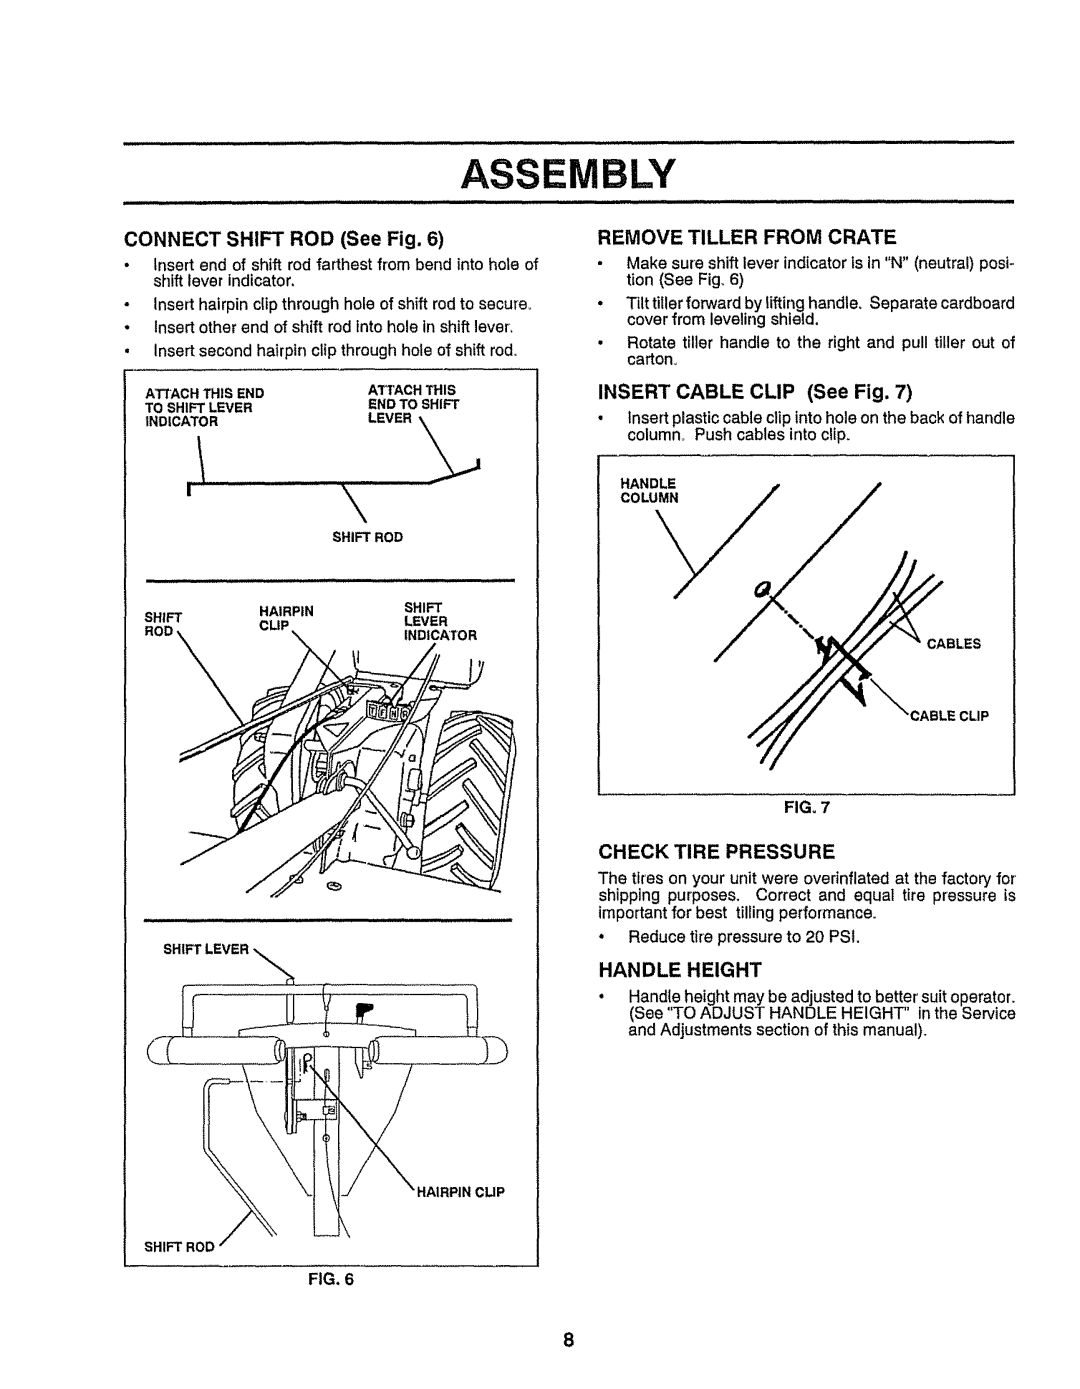 Craftsman 917-299751 owner manual Assembly, CONNECT SHIFT ROD See Fig, Remove Tiller From Crate, INSERT CABLE CLIP See Fig 